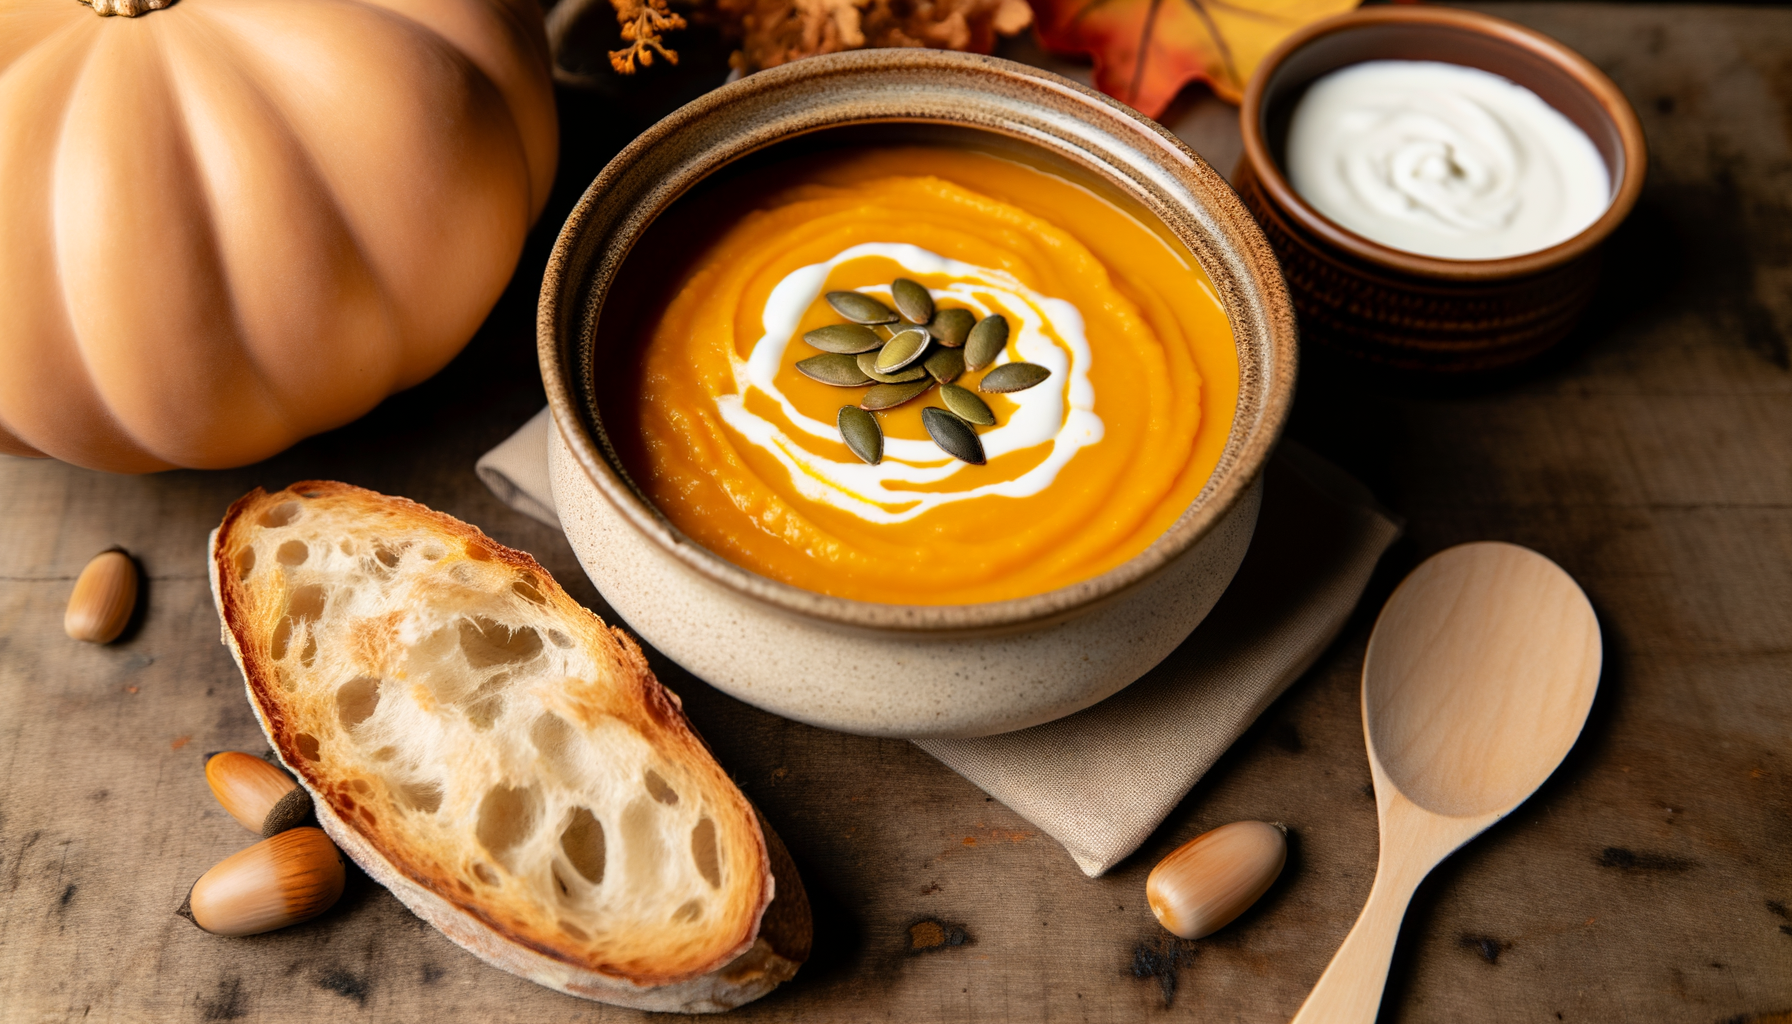 Creamy vegan butternut squash soup in rustic bowl garnished with coconut cream and pumpkin seeds, accompanied by crusty bread on a decorated wooden table.